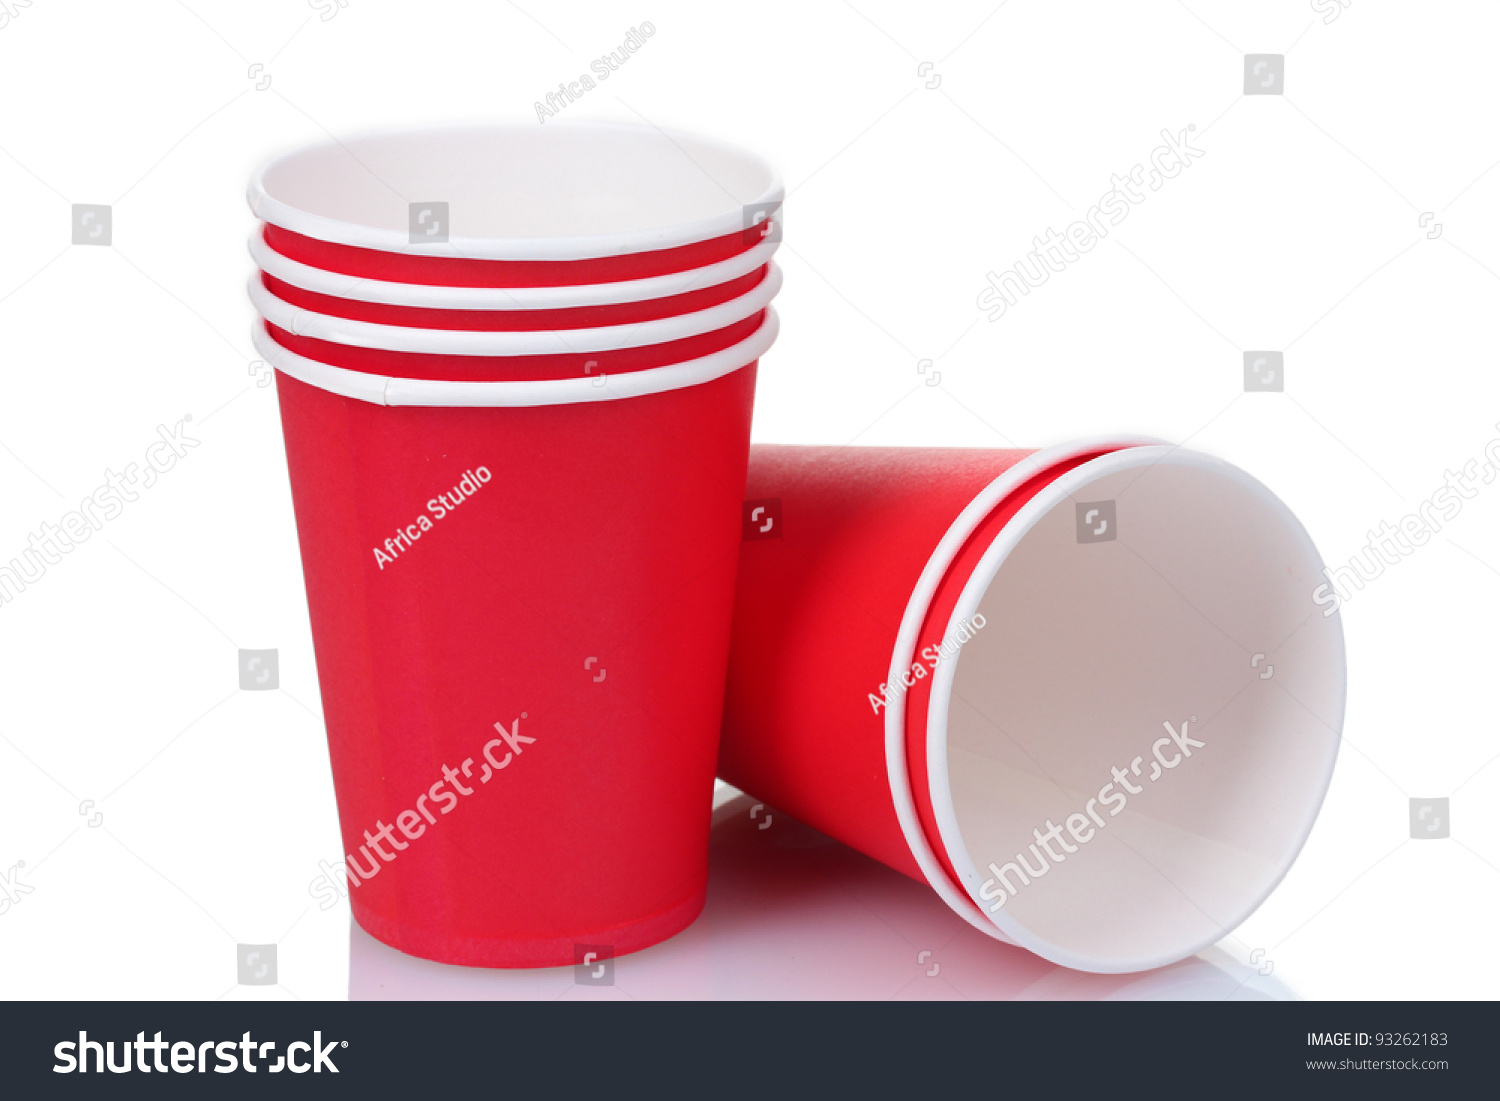 red plastic cups isolated on white #93262183